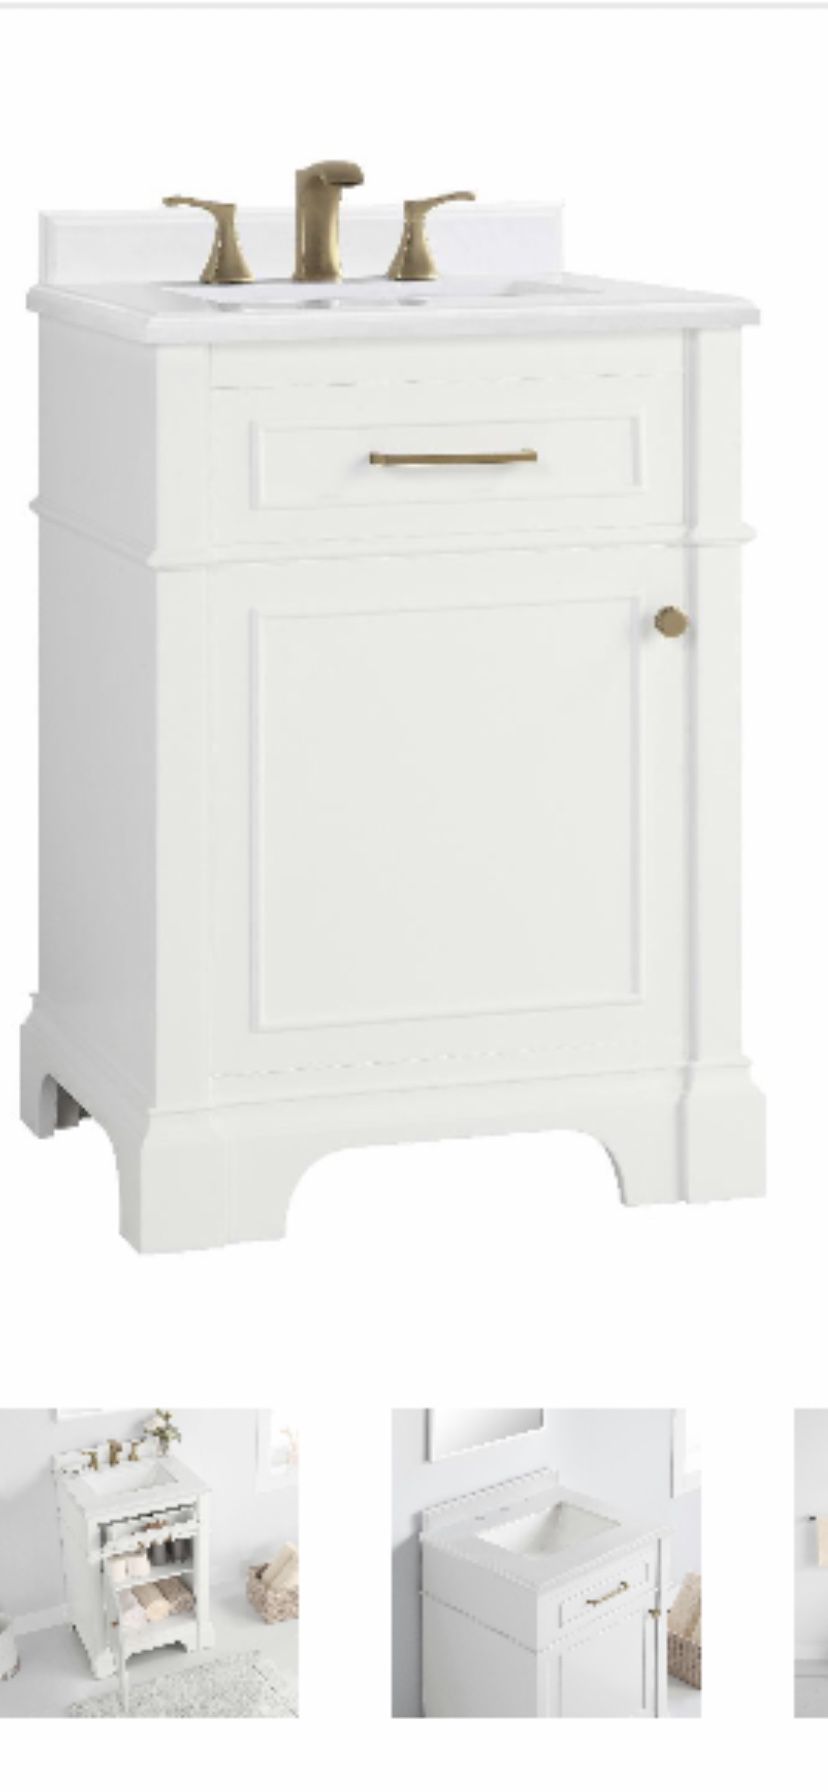 Home Decorators Collection Melpark 24 in. W x 20 in. D Bath Vanity in White with Cultured Marble Vanity Top in White with White Sink